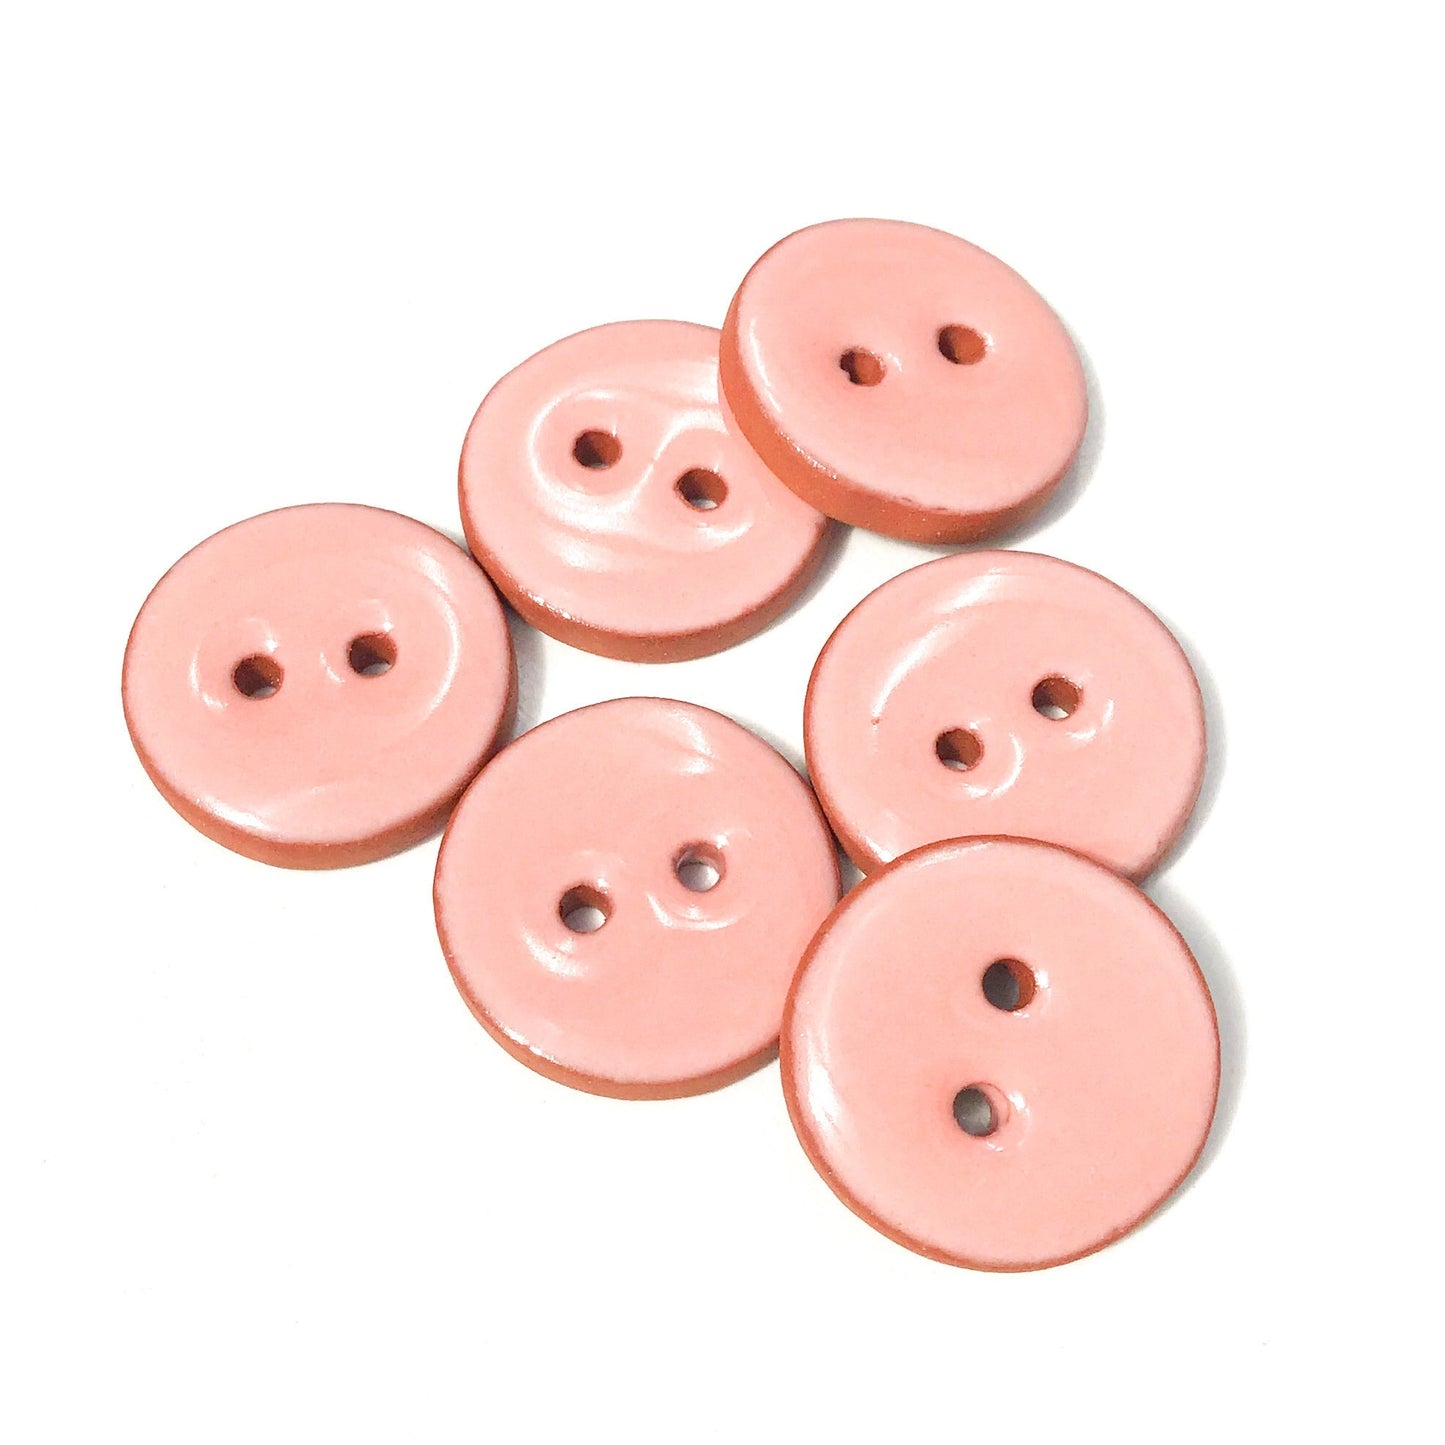 (Wholesale Accounts Only) 3/4" round - flat - red clay (ws-43)